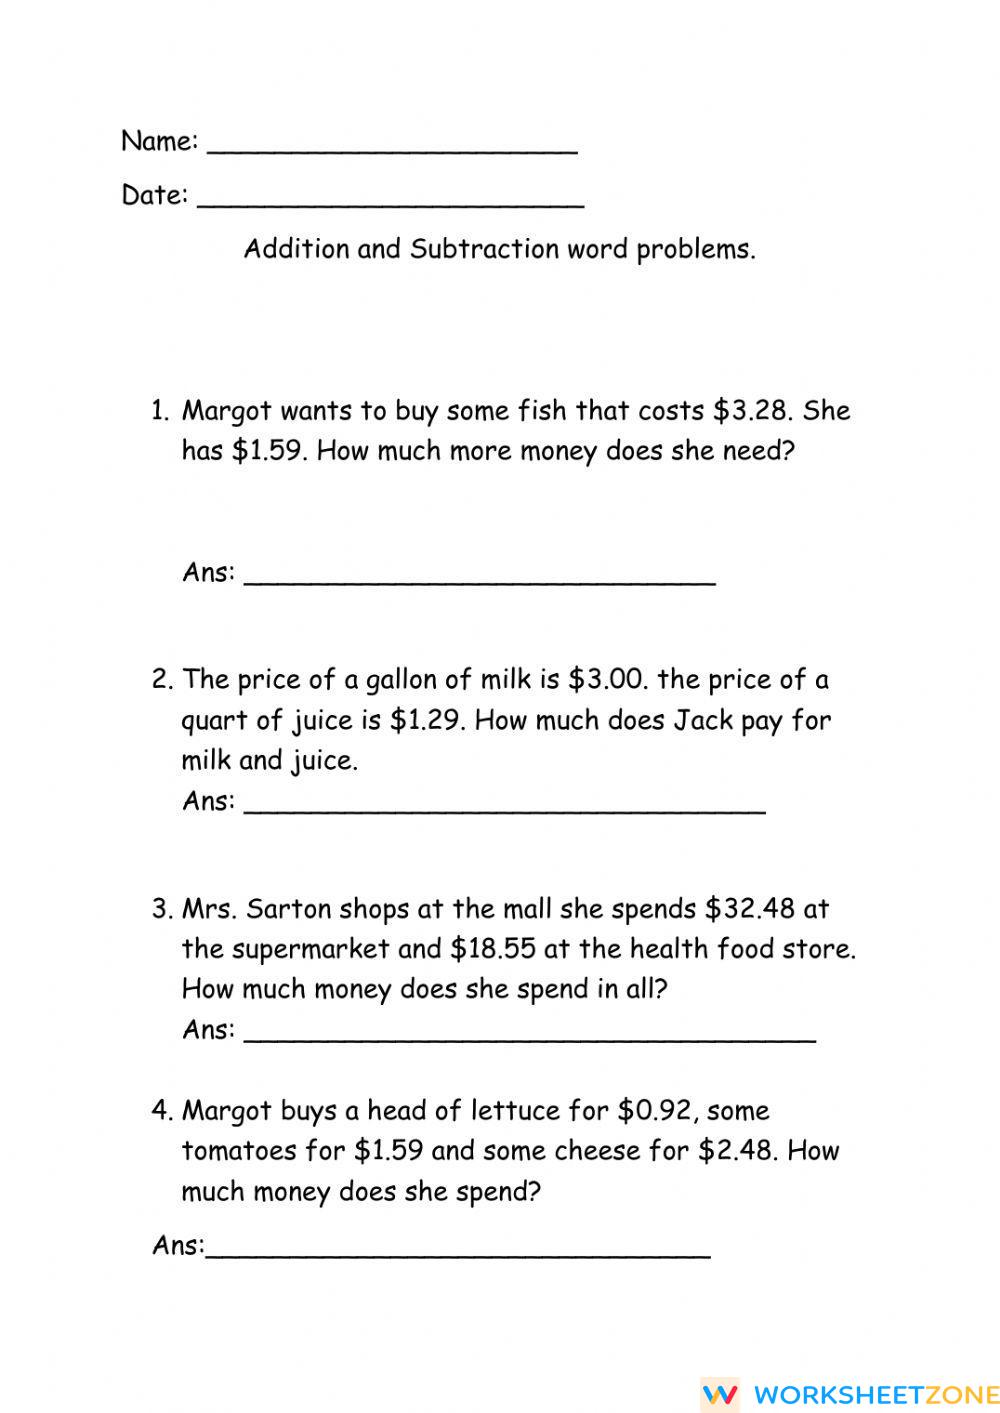 addition-and-subtraction-word-problems-worksheet-zone